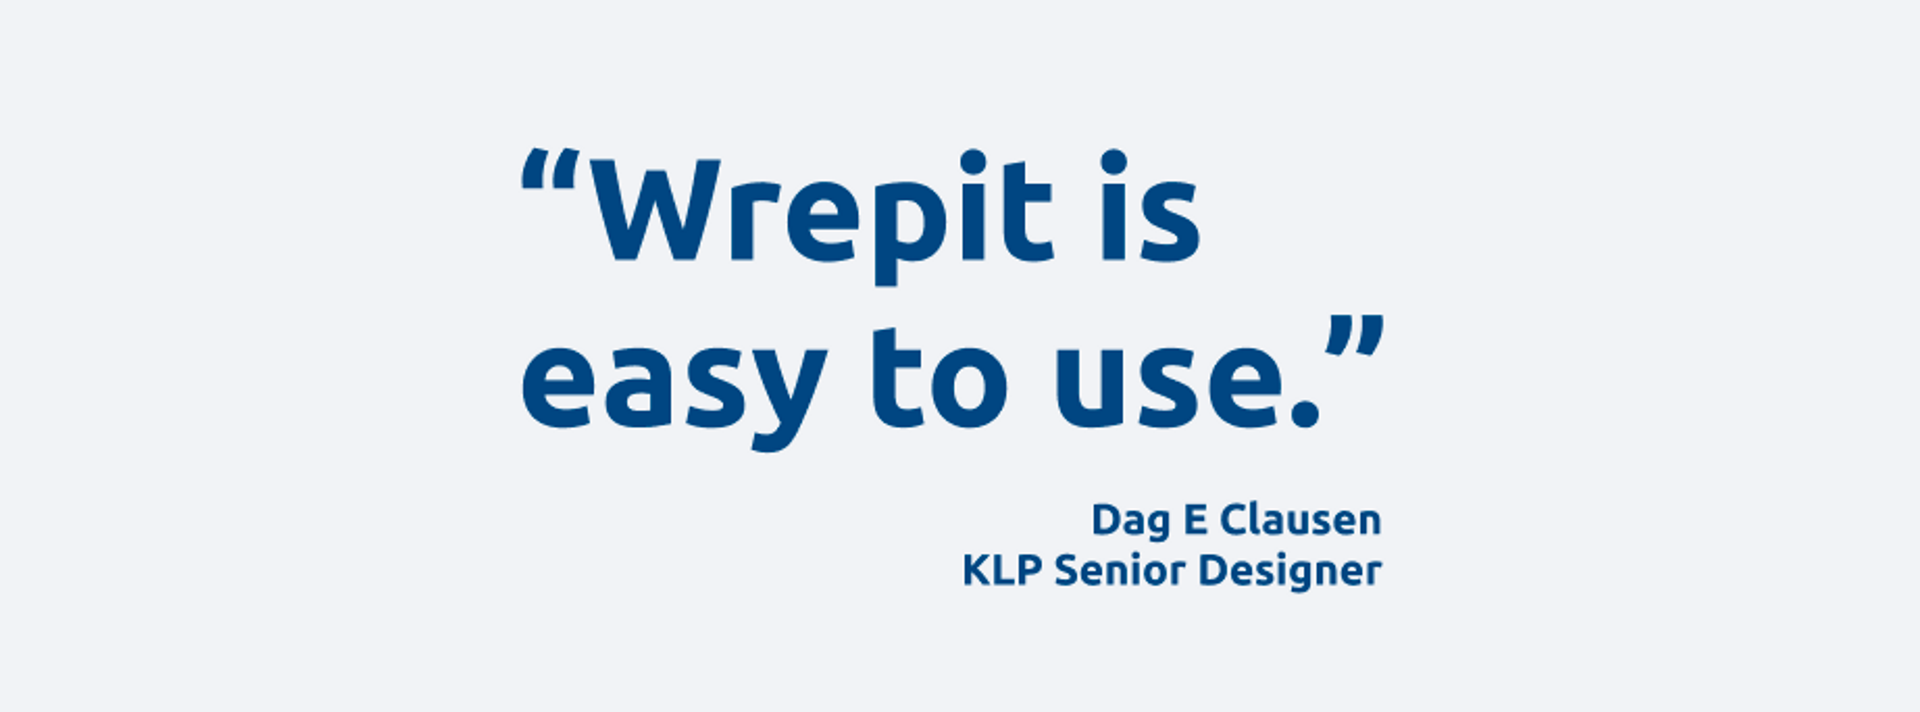 Quote "Wrepit is easy to use"